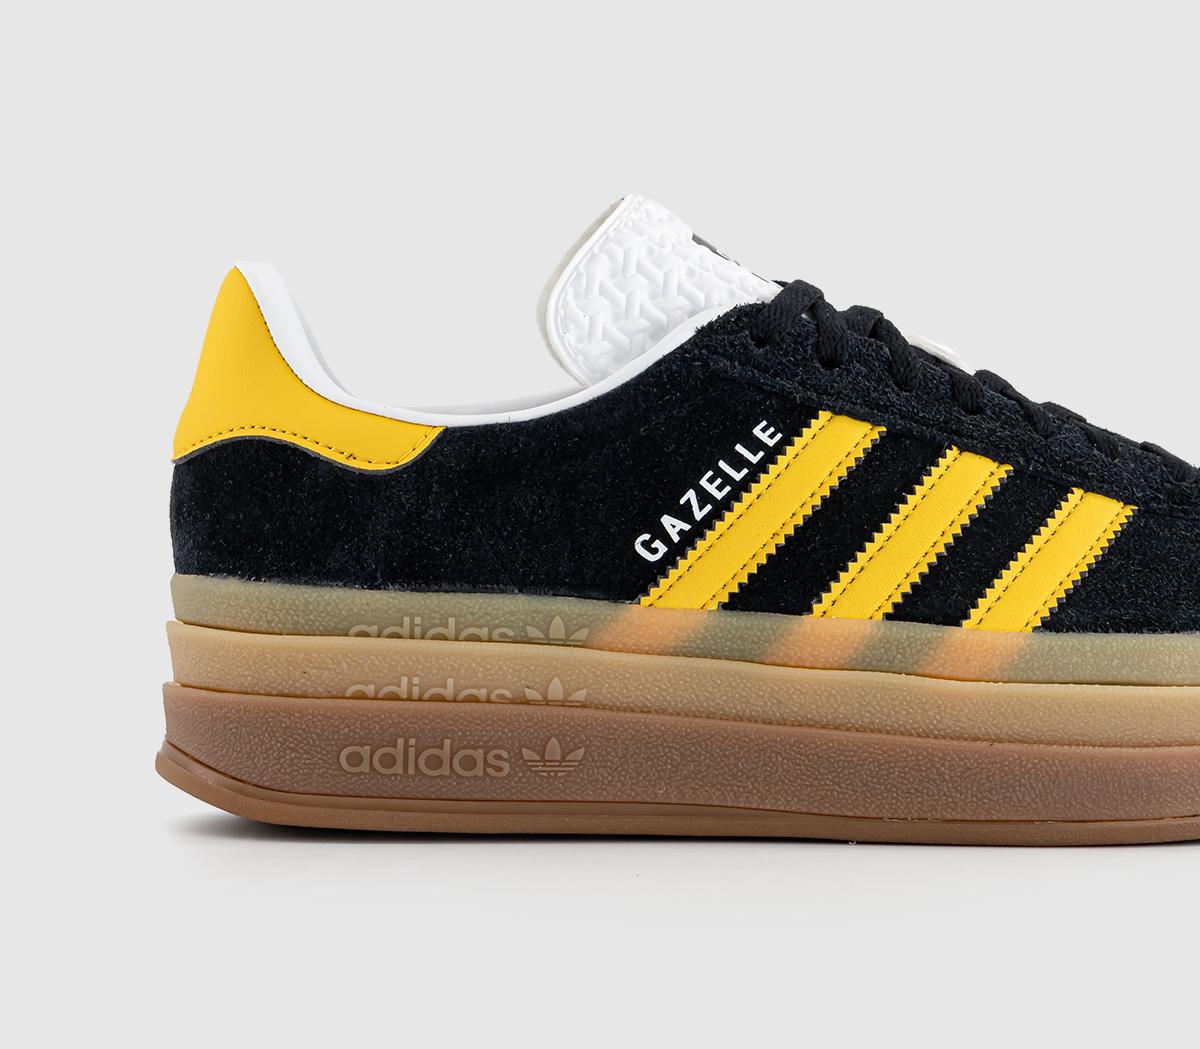 adidas Gazelle Bold W Trainers Black Bold Gold White - Women's Trainers